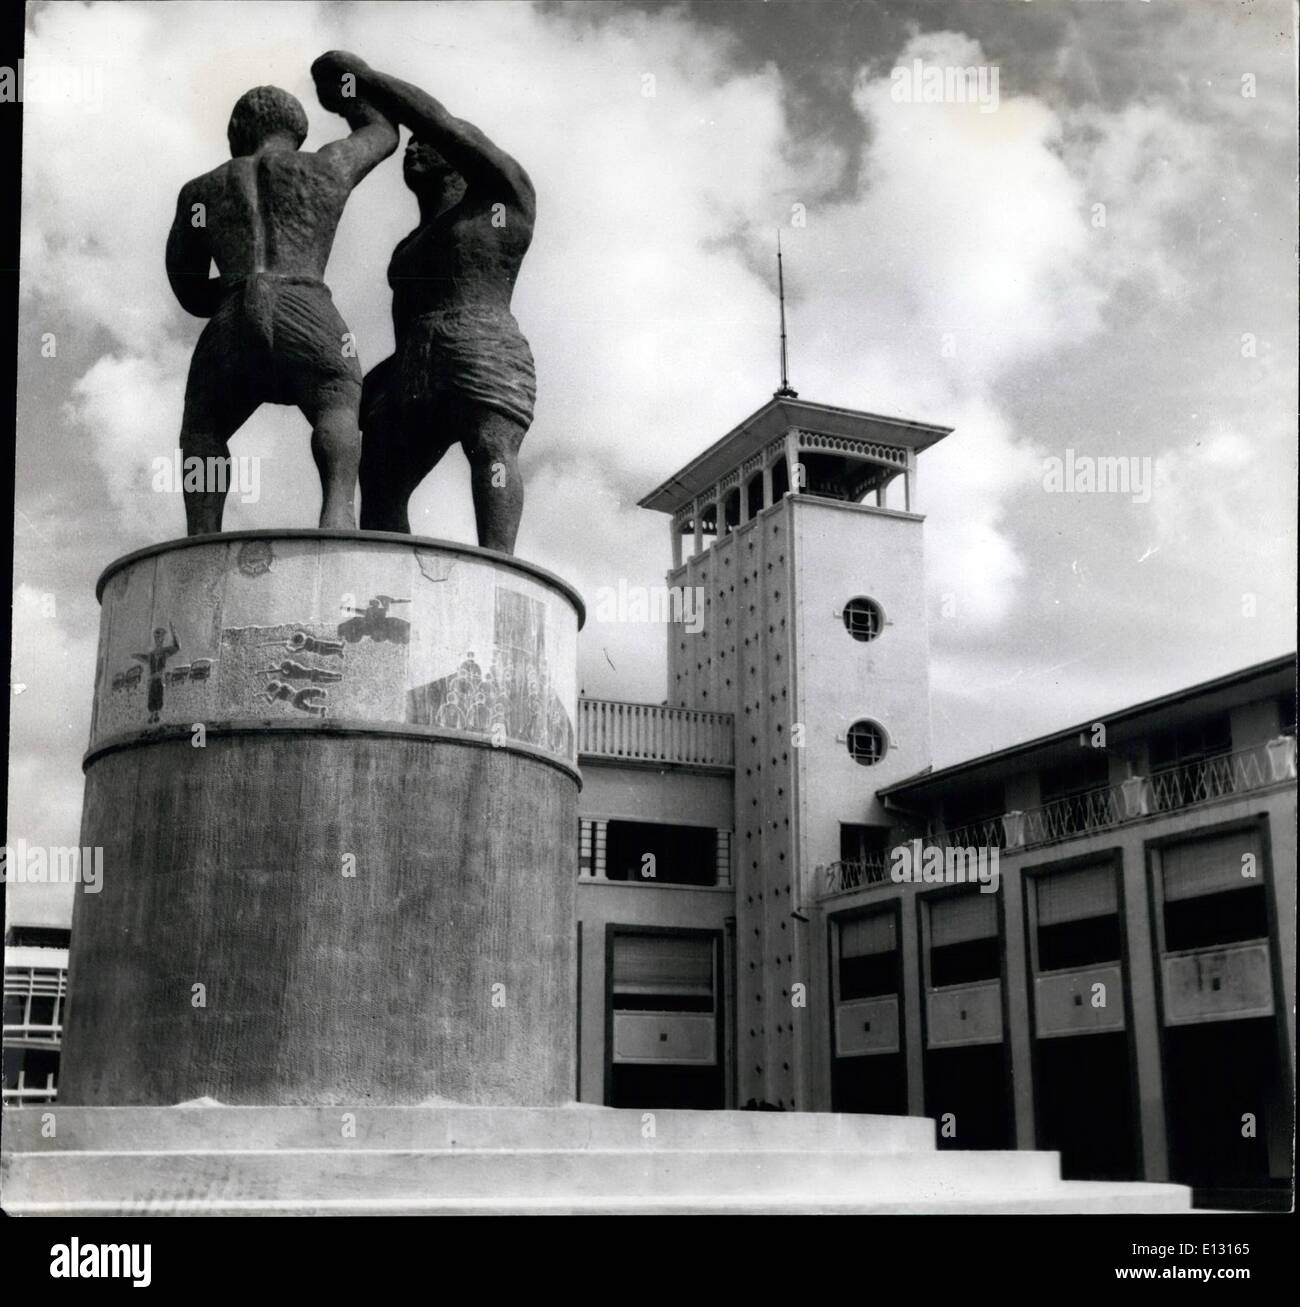 Feb. 26, 2012 - Police Headquarters: The new Indonesian Police Headquarters has this giant sculpture of two wrestler, symbolically the Force Fighting Crime, which dominates the front lawns. Stock Photo